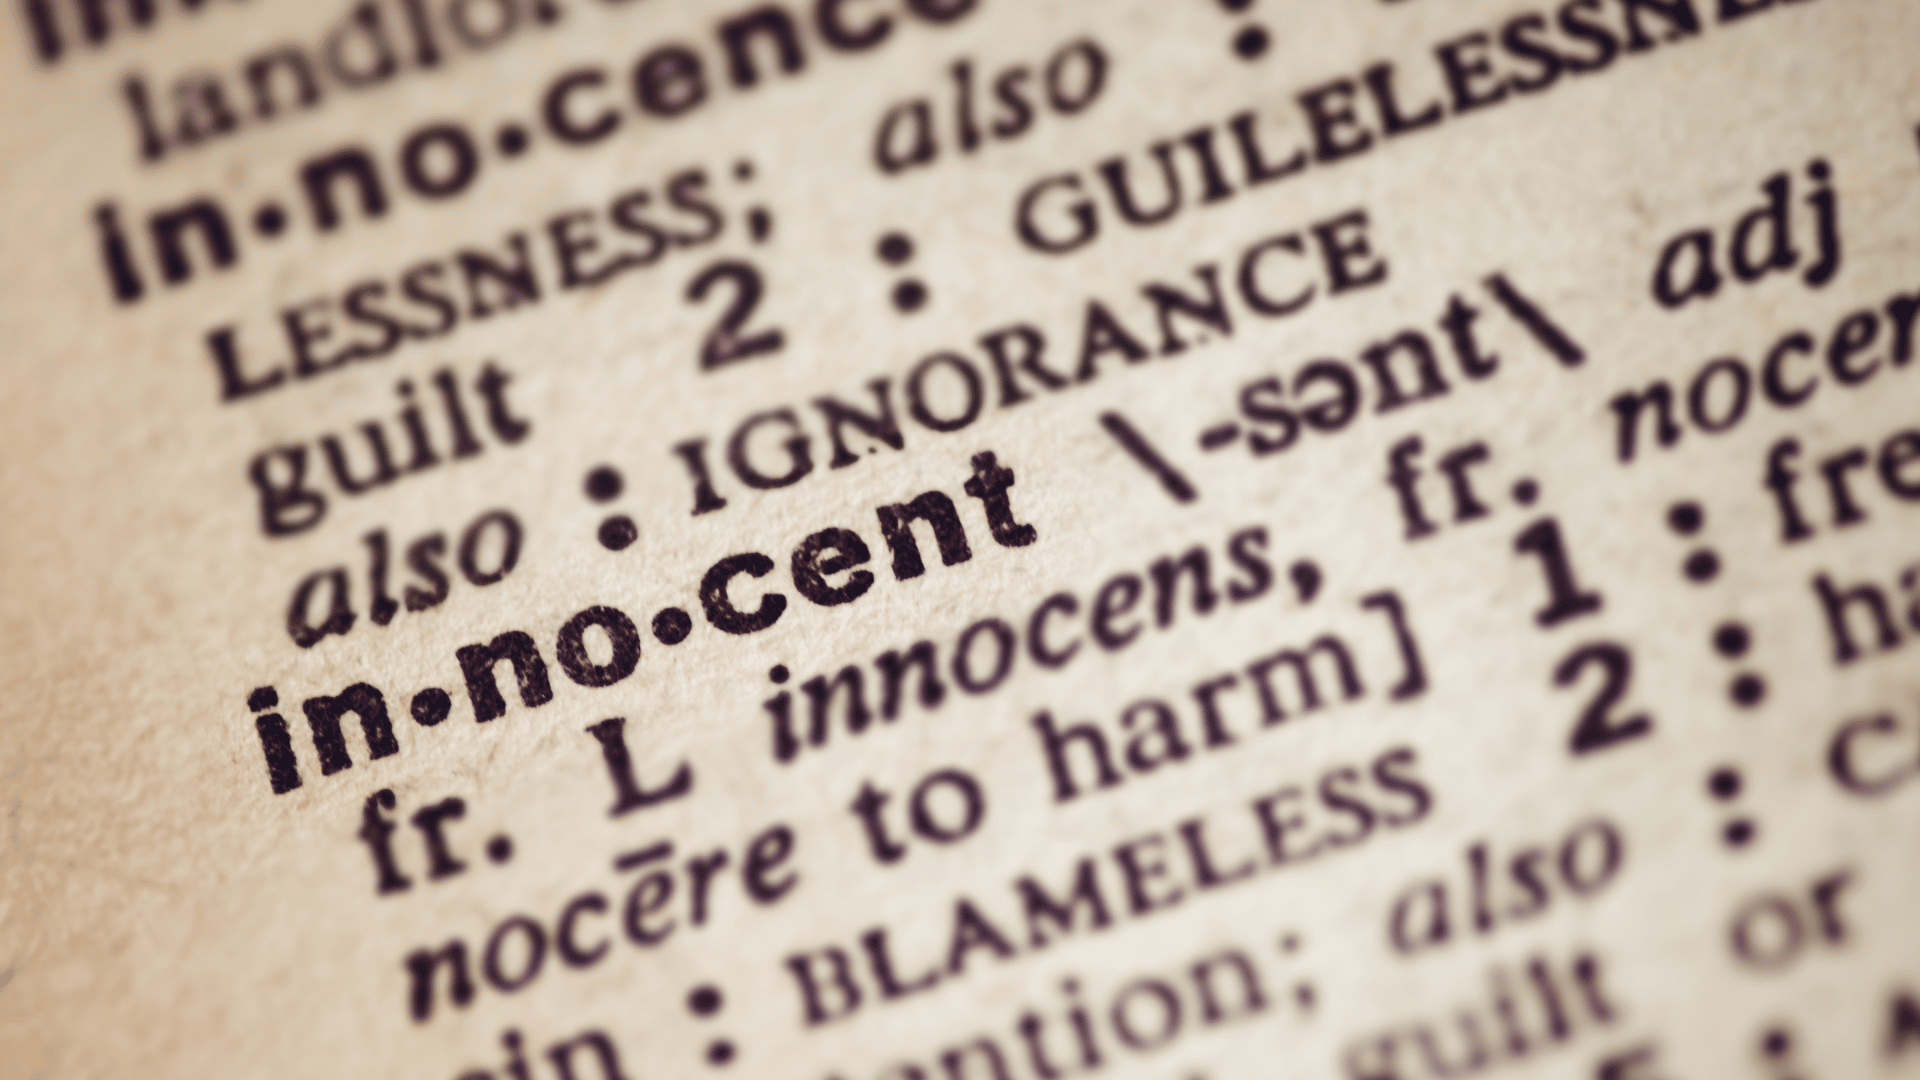 Page of dictionary focused on the definition and word: innocent. Criminal Lawyers Penrith, Norwest & Sydney CBD. Criminal Defence Lawyers Sydney.